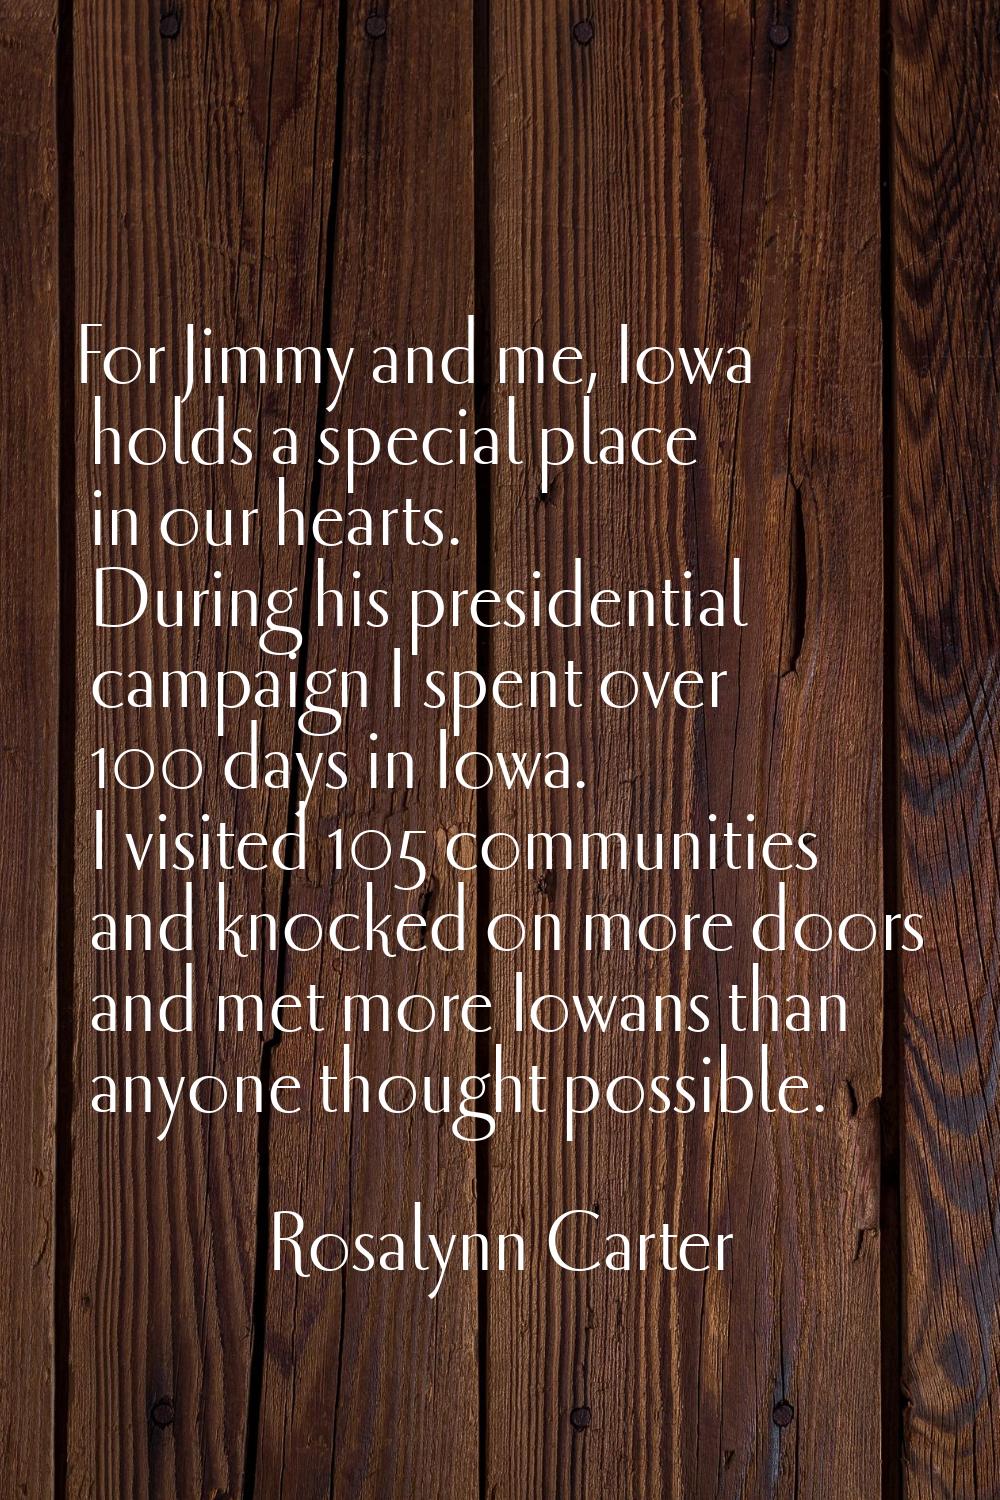 For Jimmy and me, Iowa holds a special place in our hearts. During his presidential campaign I spen